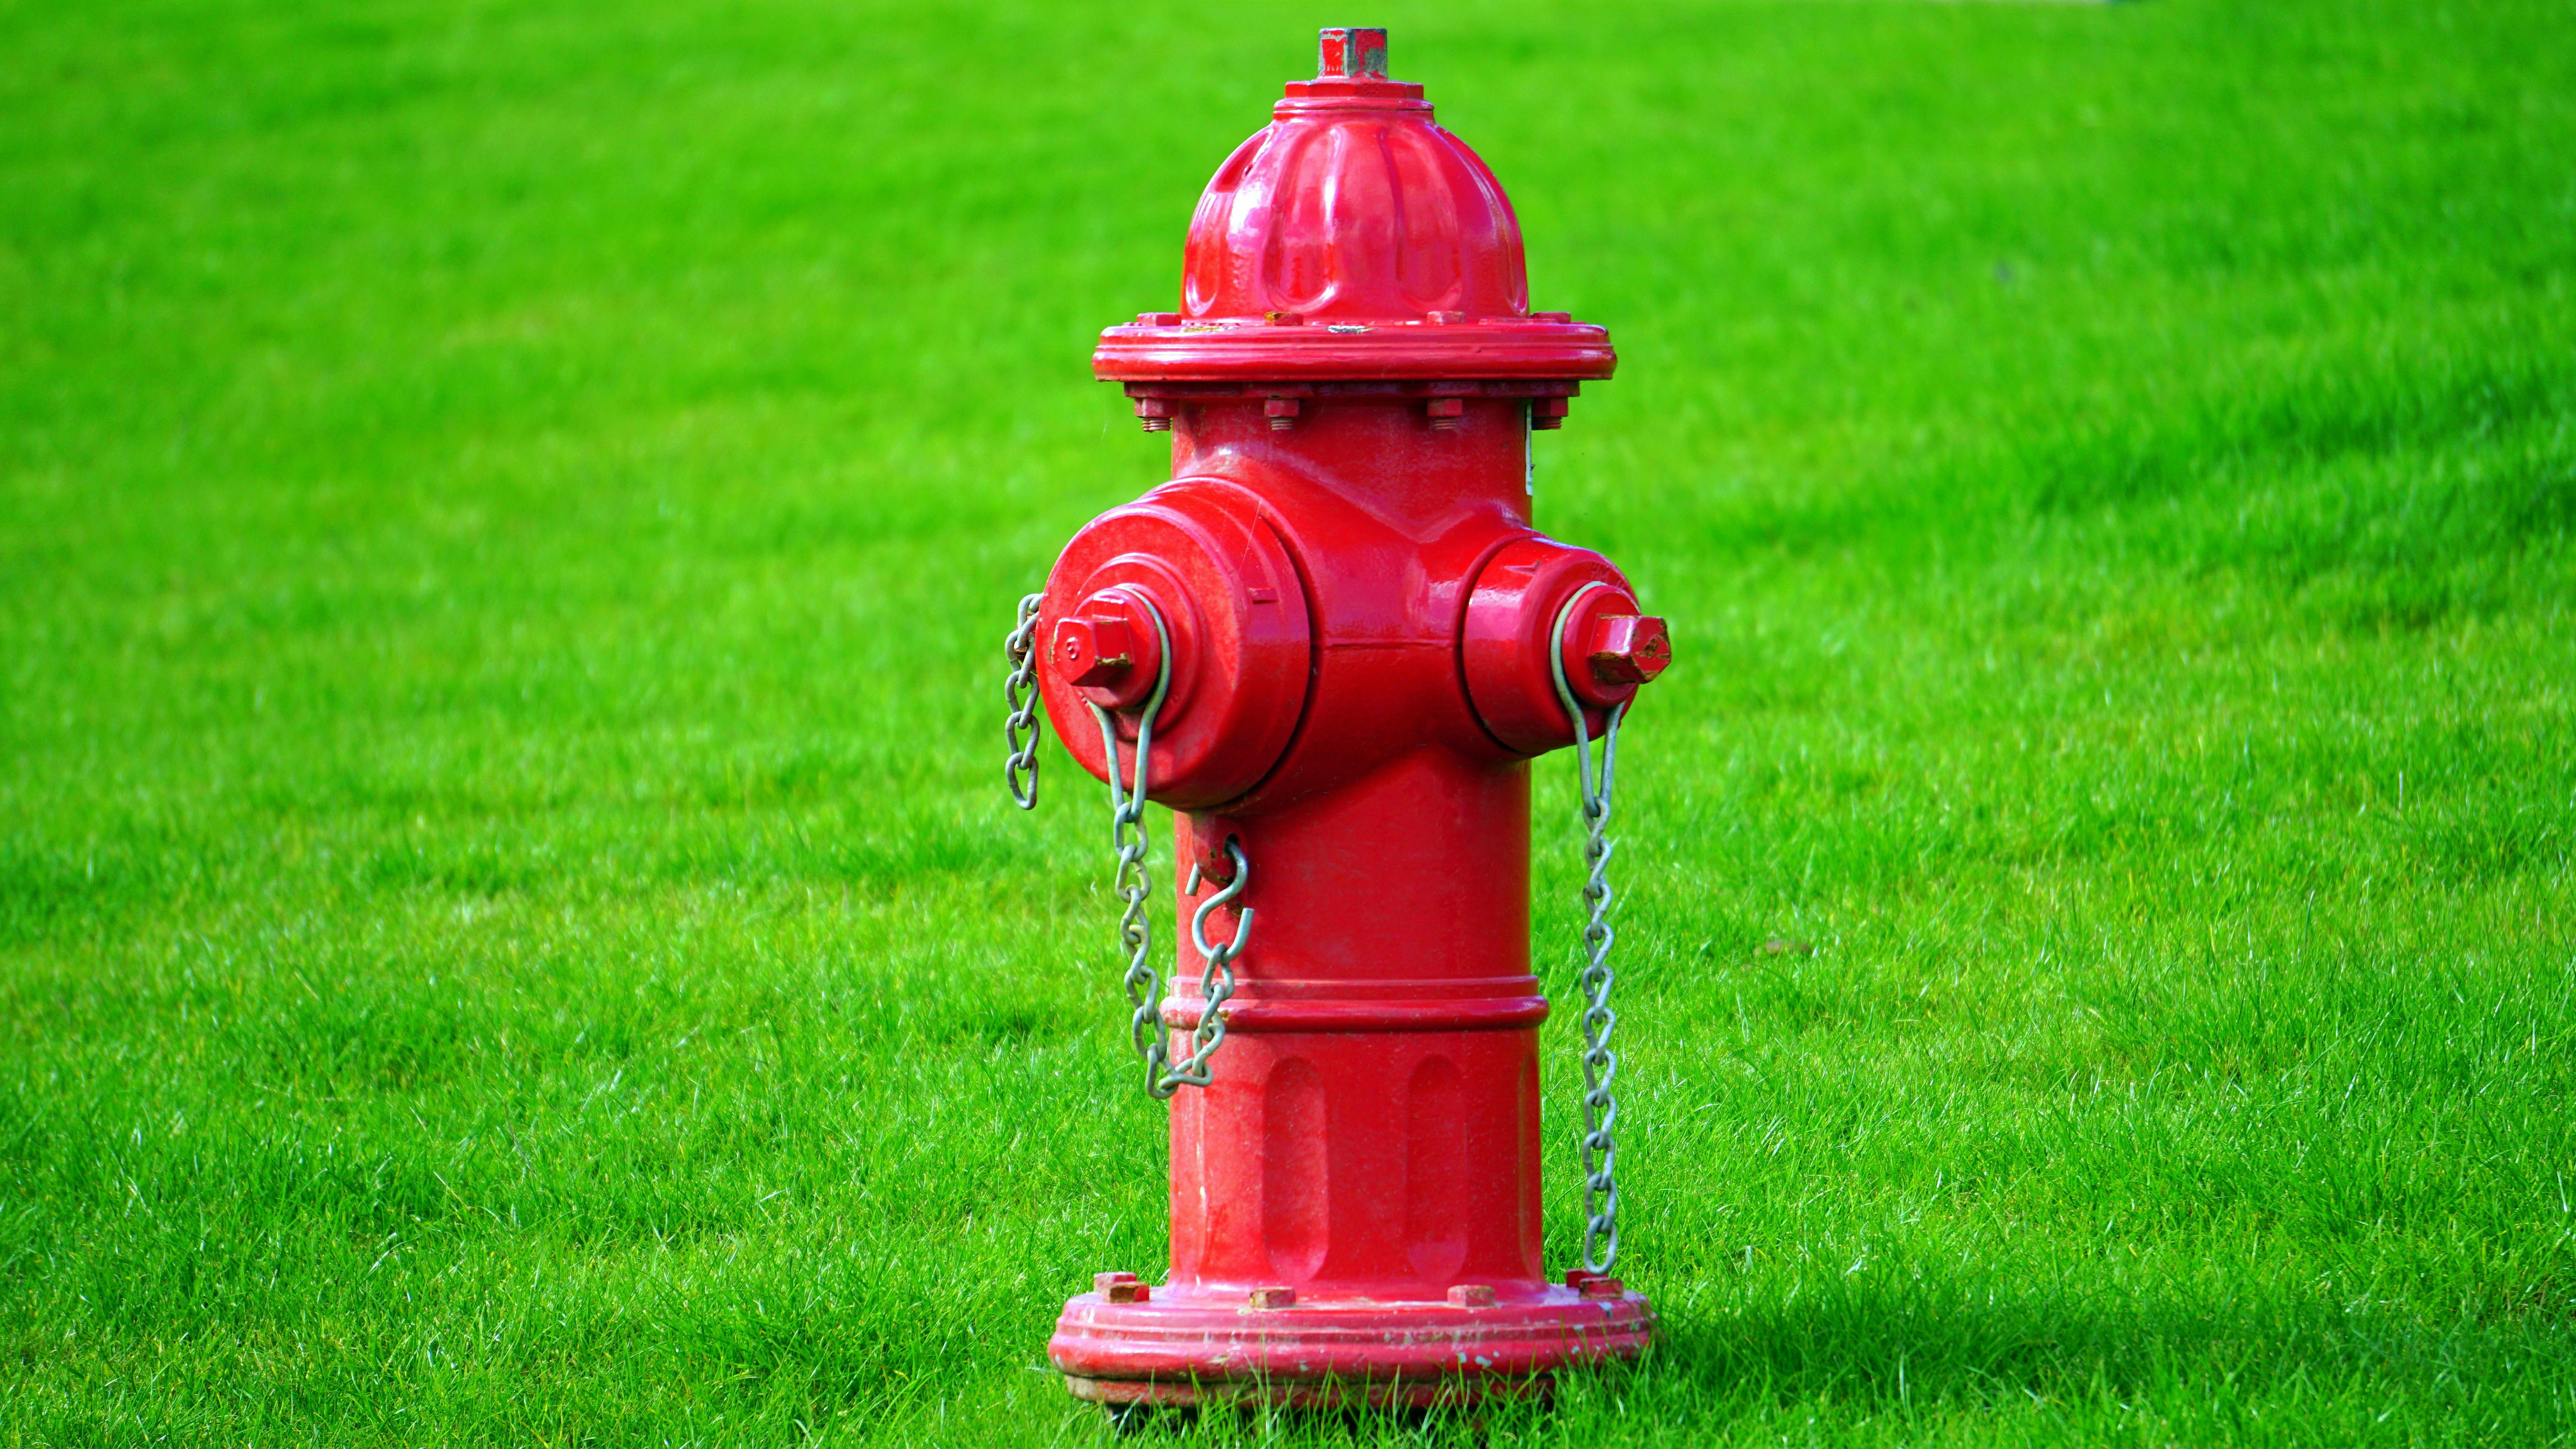 A red fire hydrant